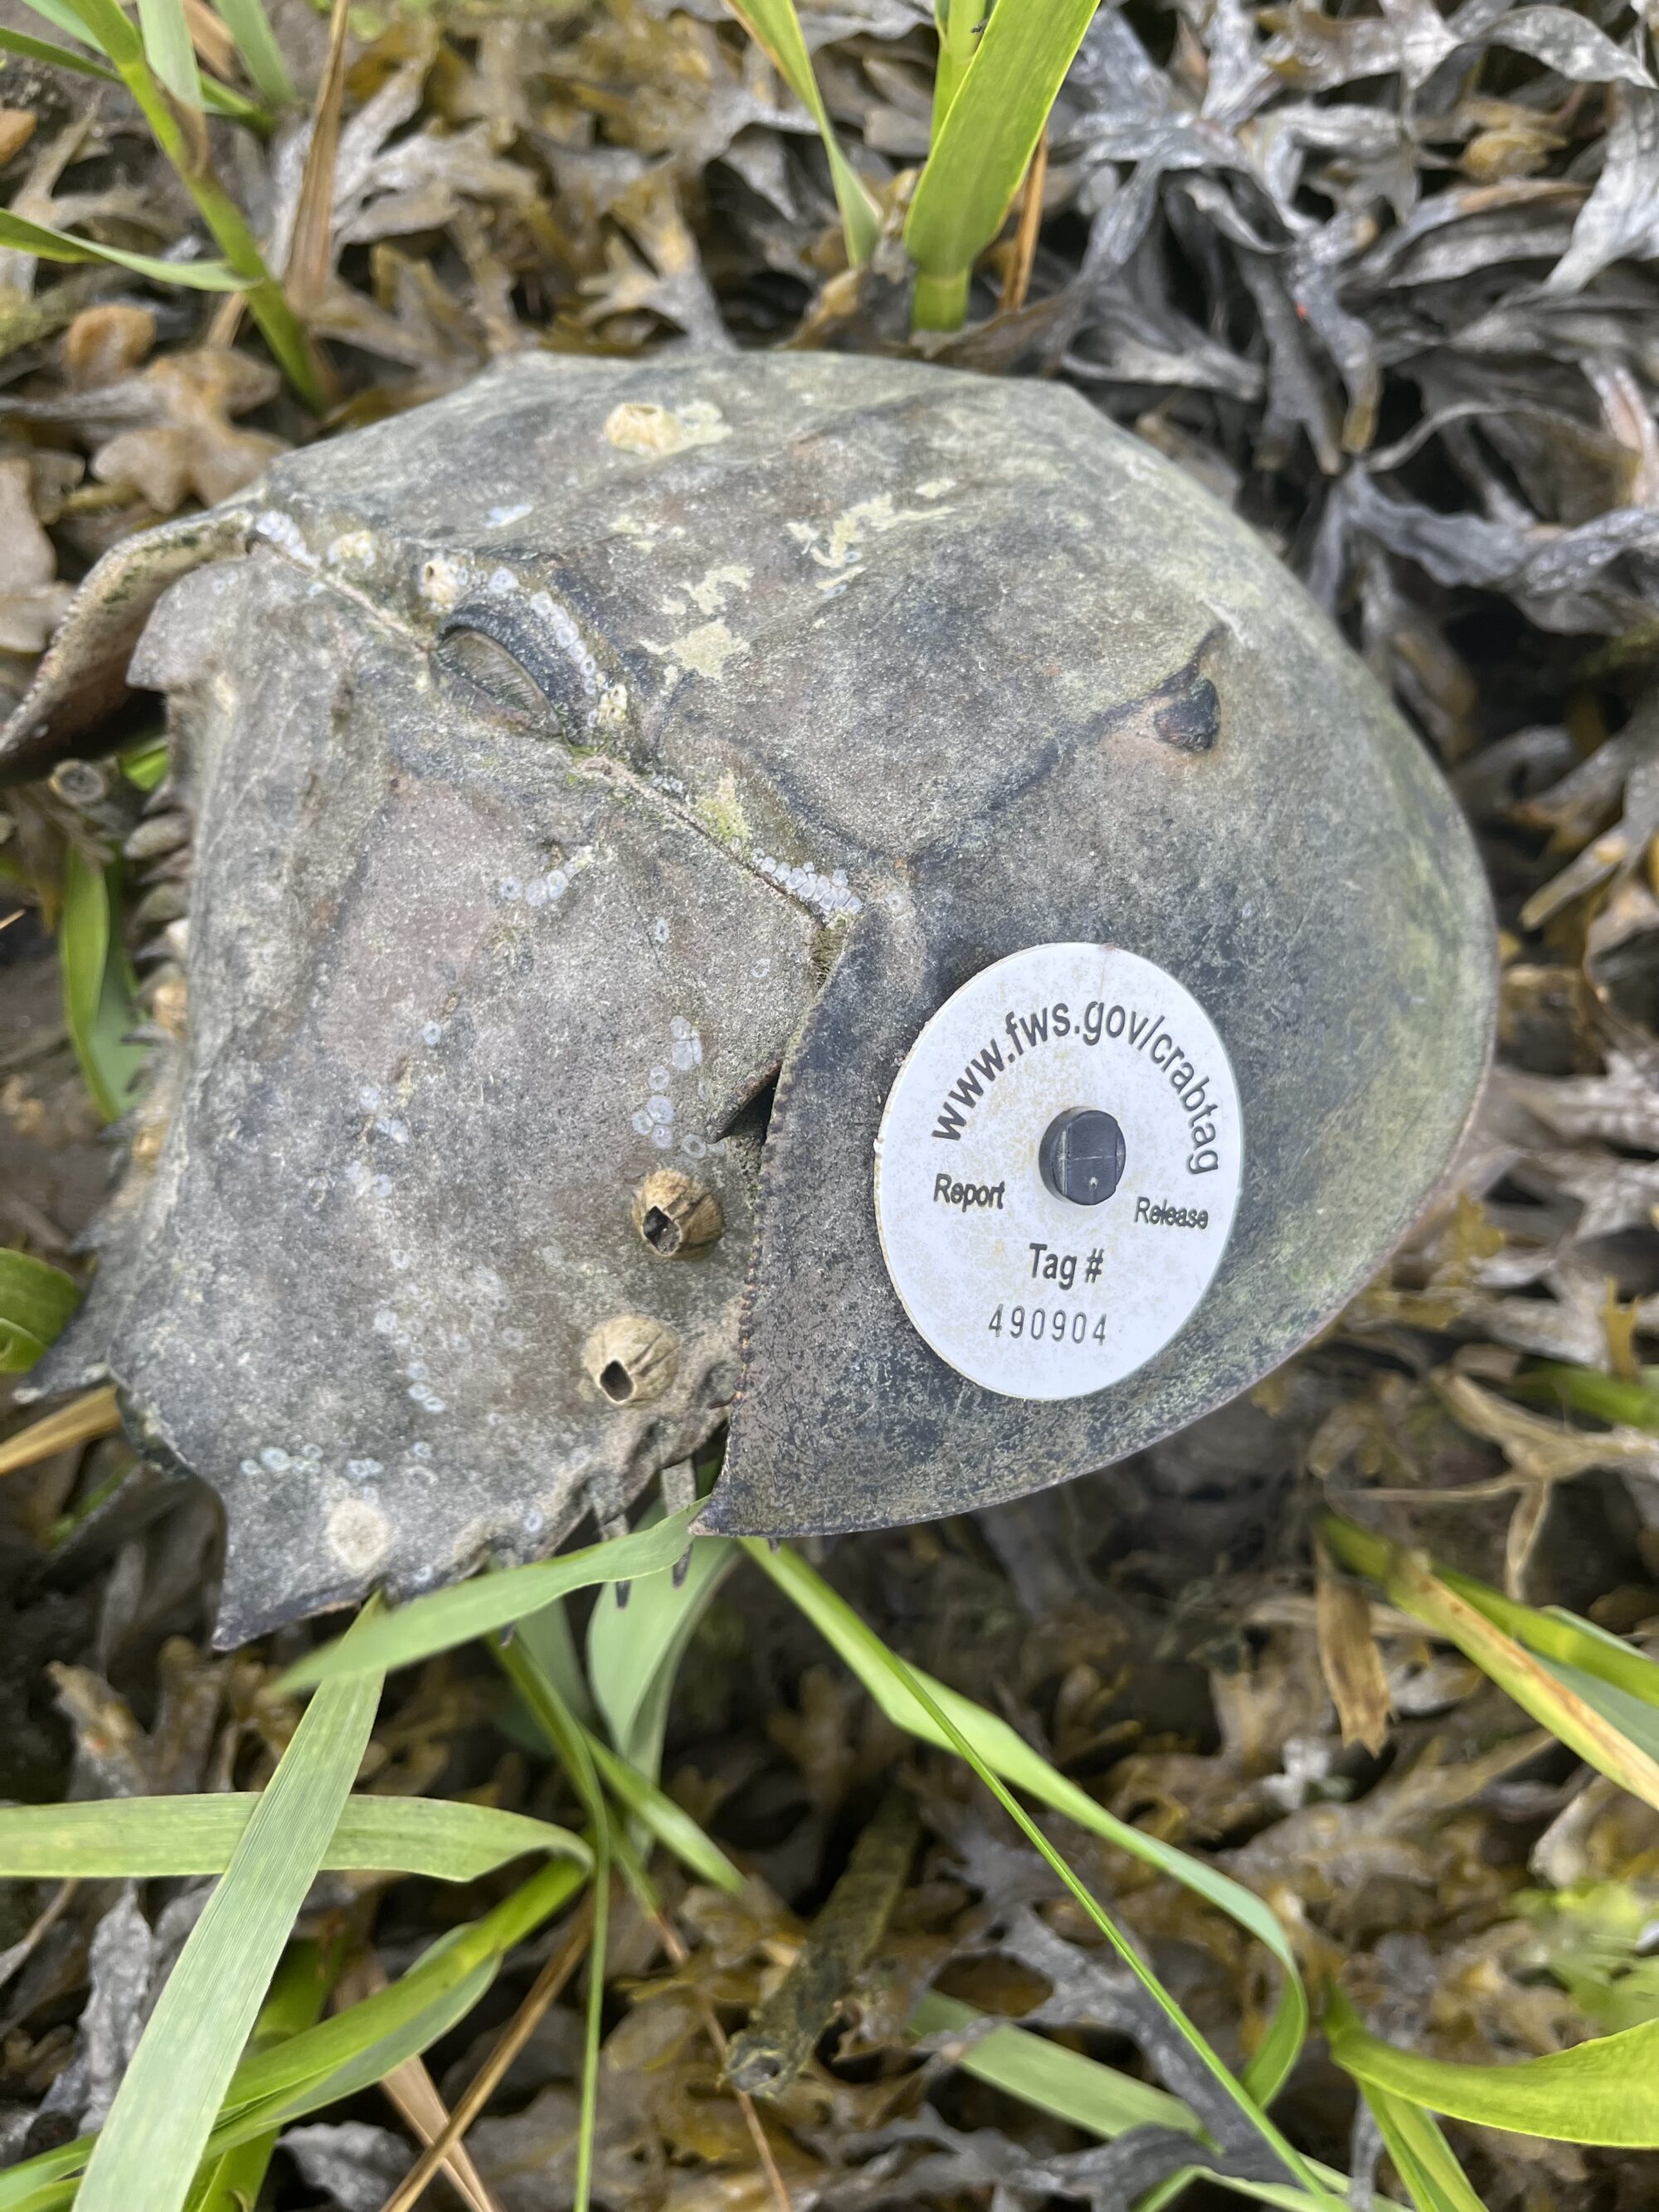 An American horseshoe crab tagged with a white circular button that includes a Fish and Wildlife Service url. 